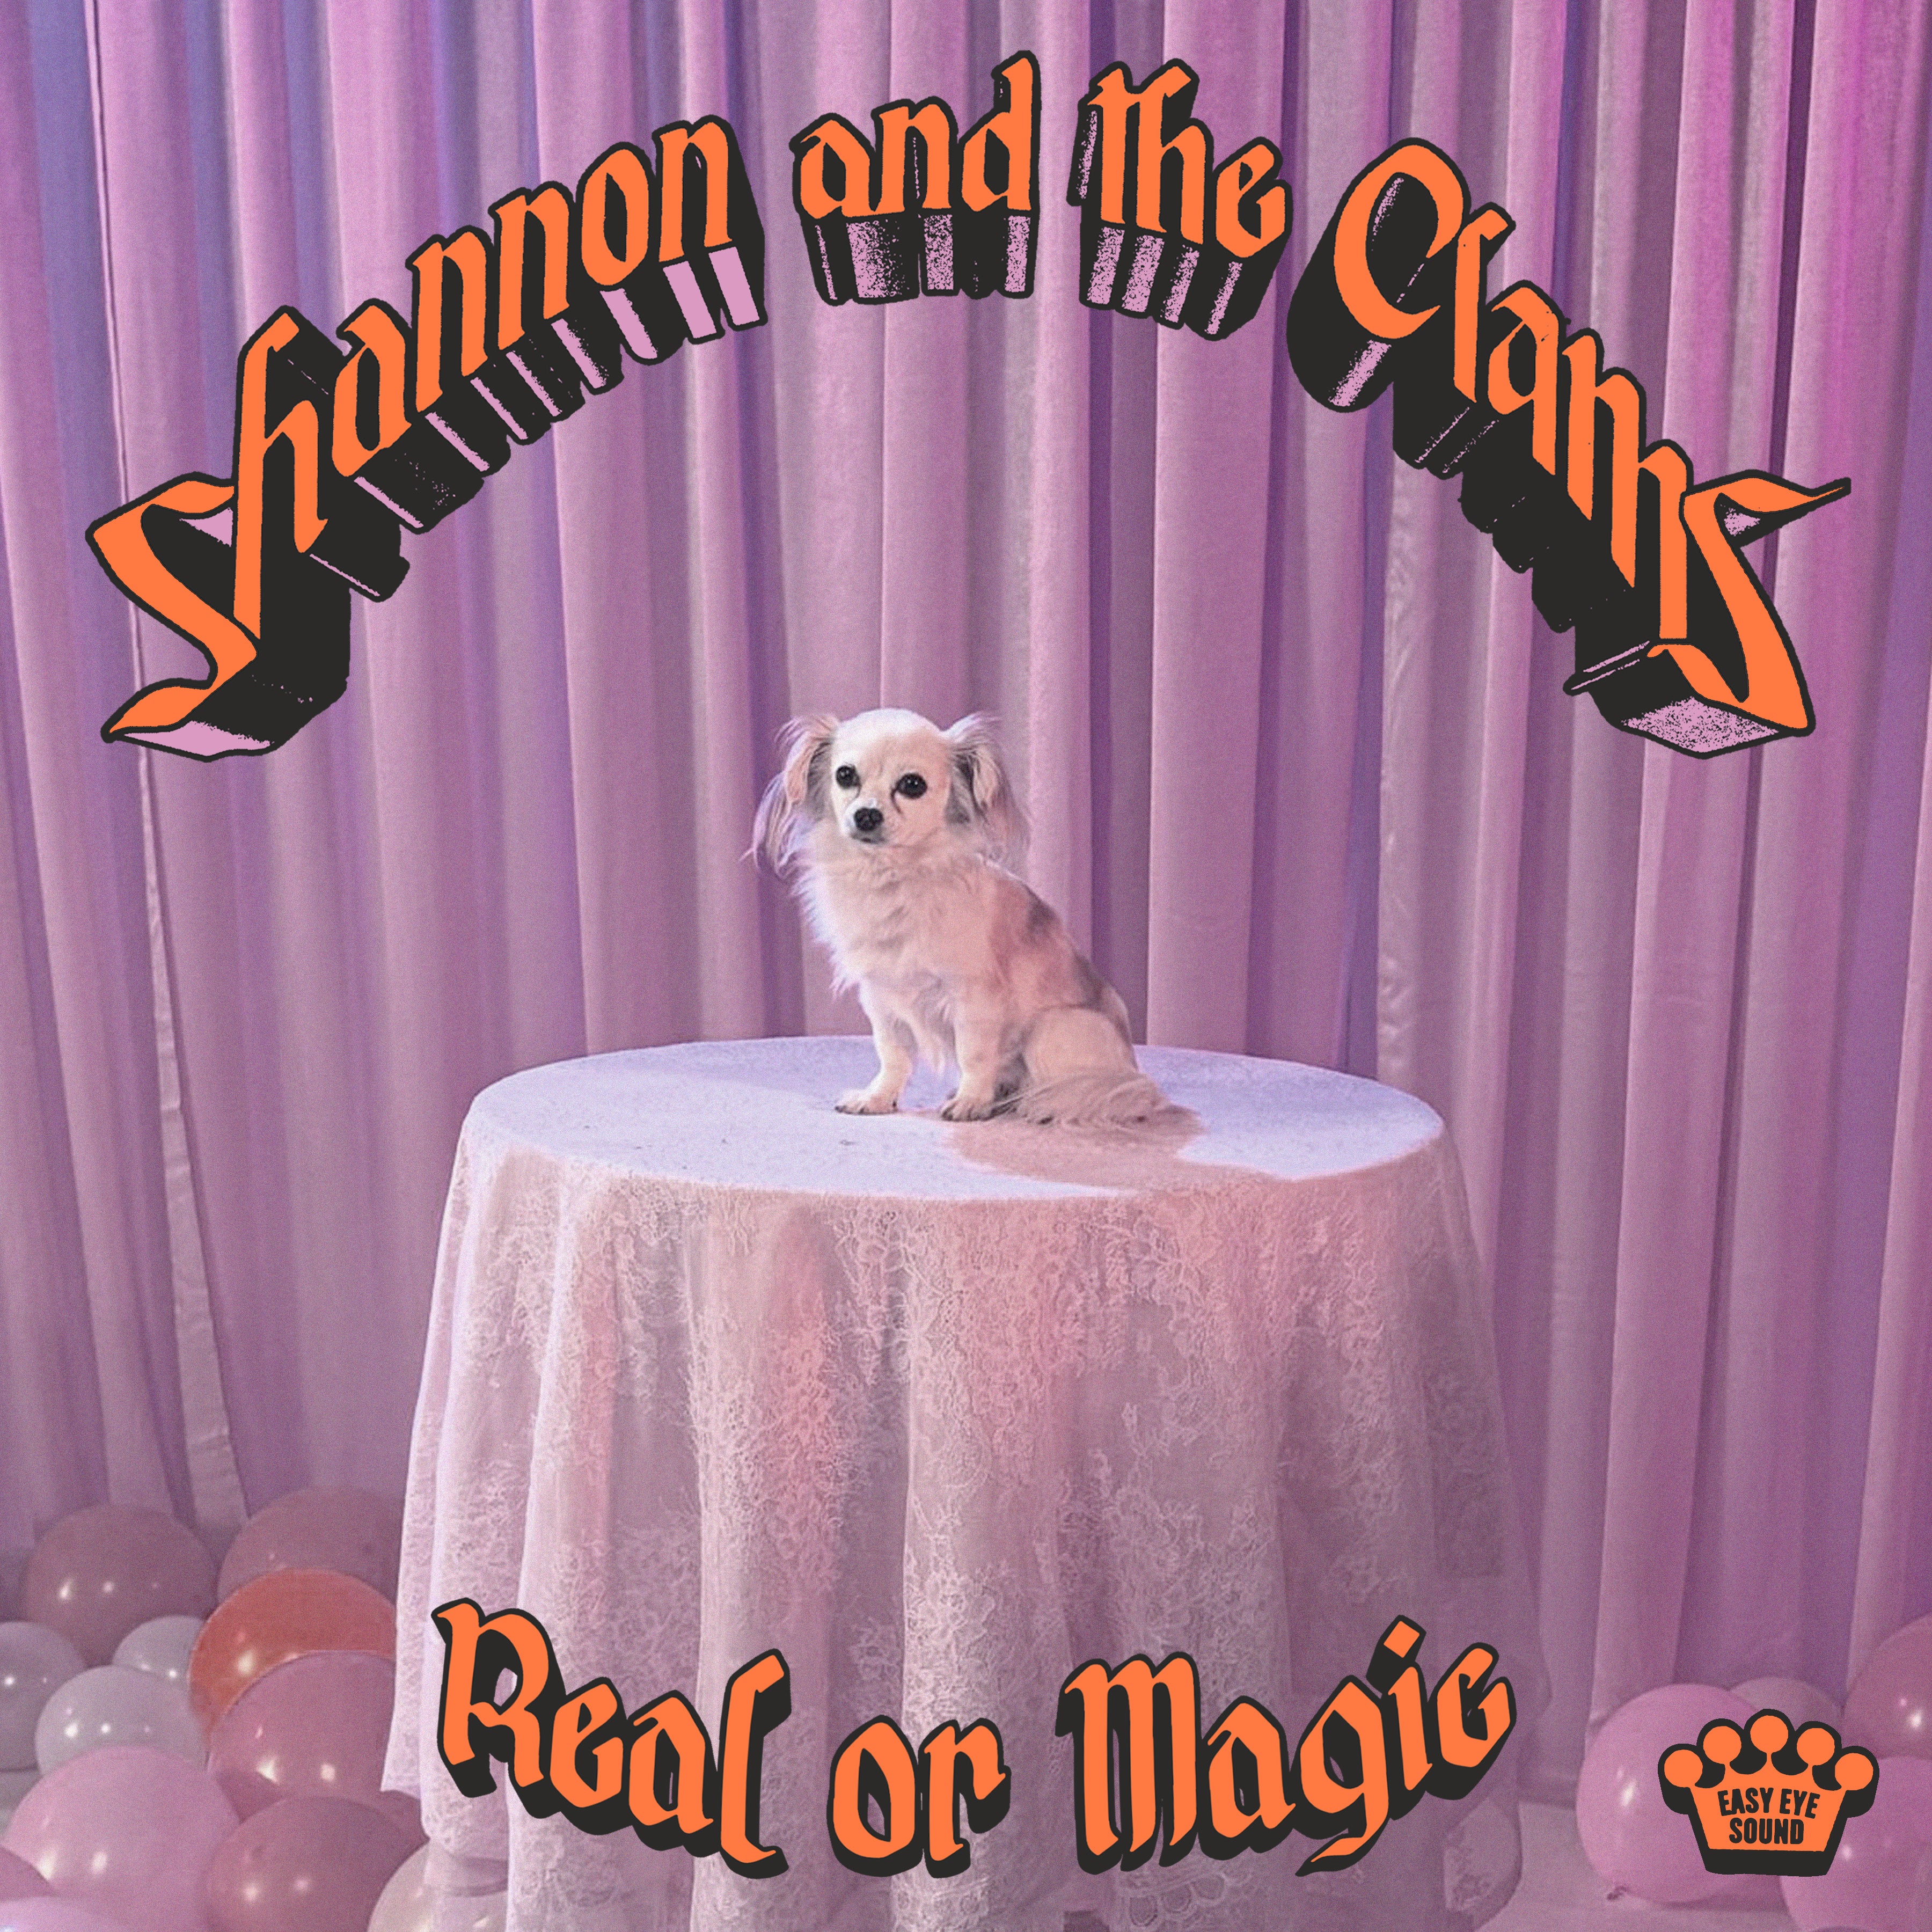 "Real Or Magic" by Shannon & The Clams is streaming everywhere now!